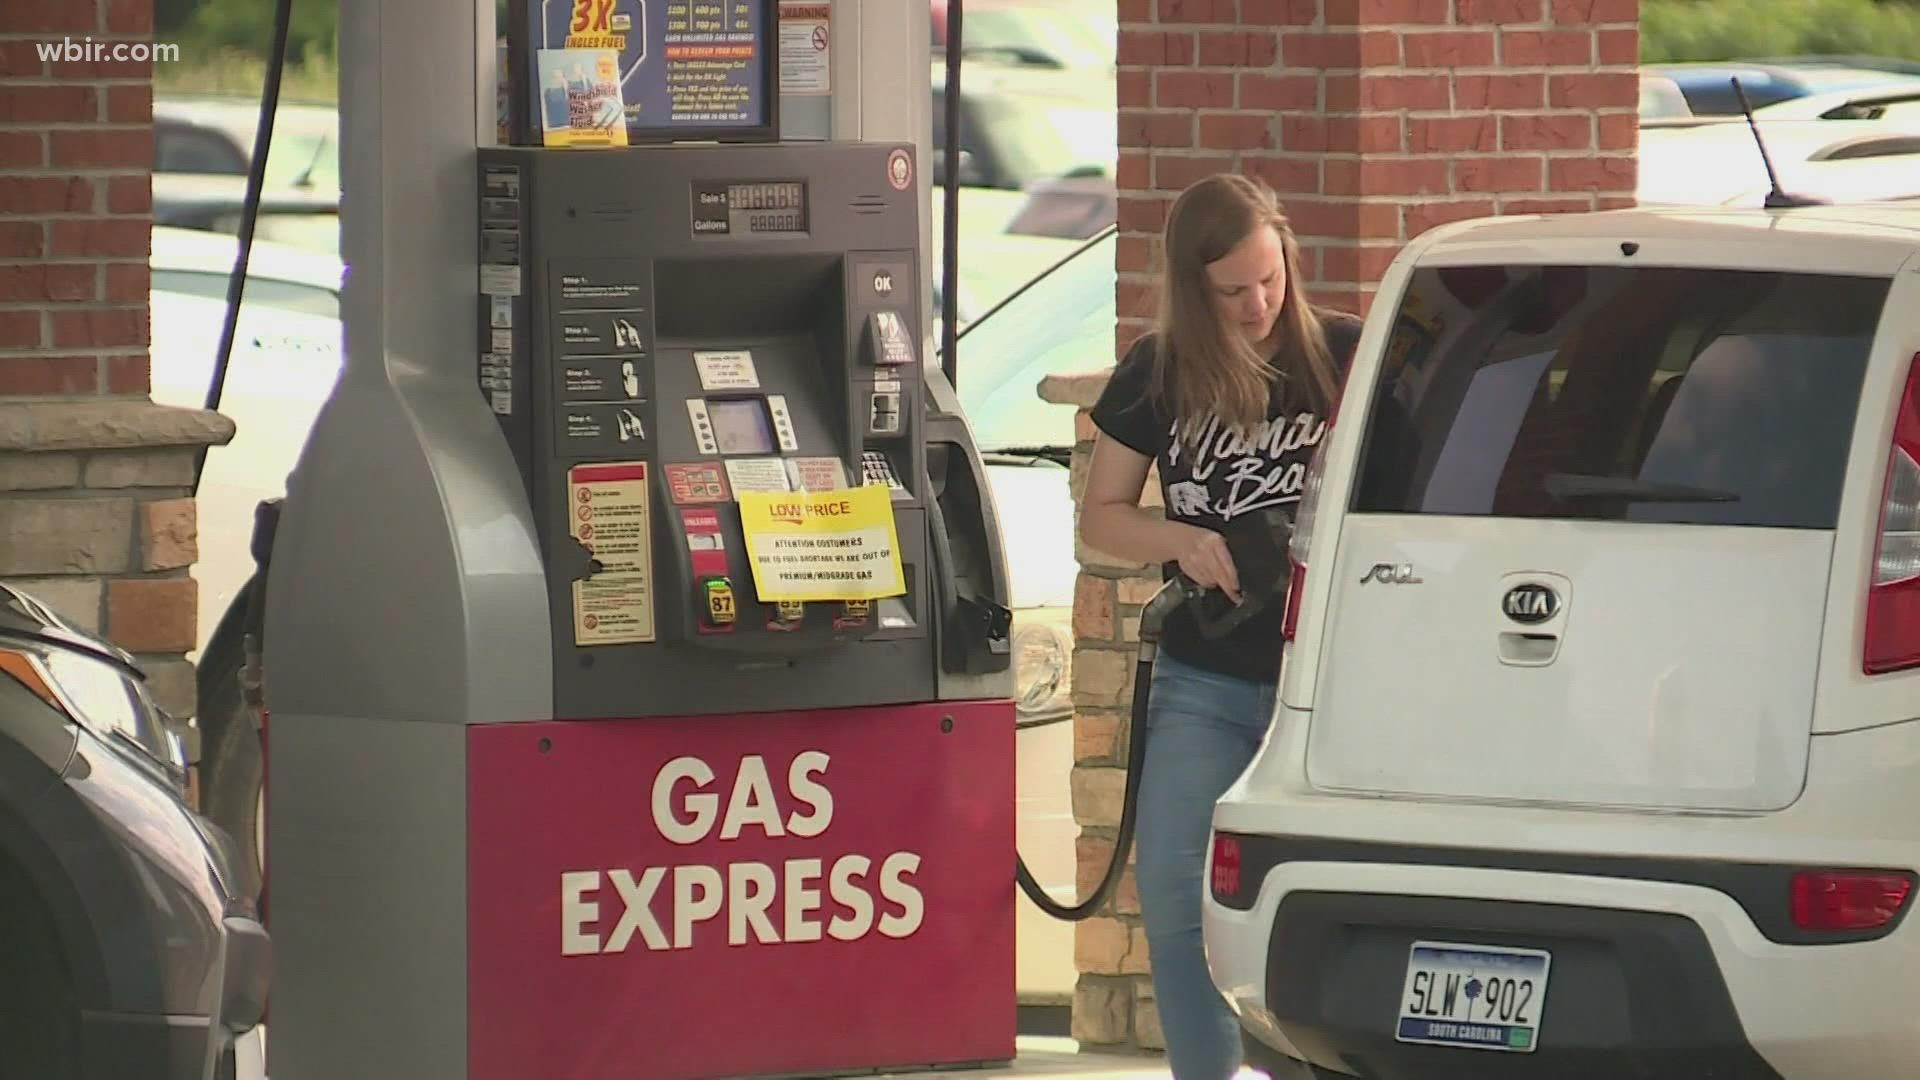 While now above $3 on average, the average price of gas in Tennessee is about 26 cents below the national average.